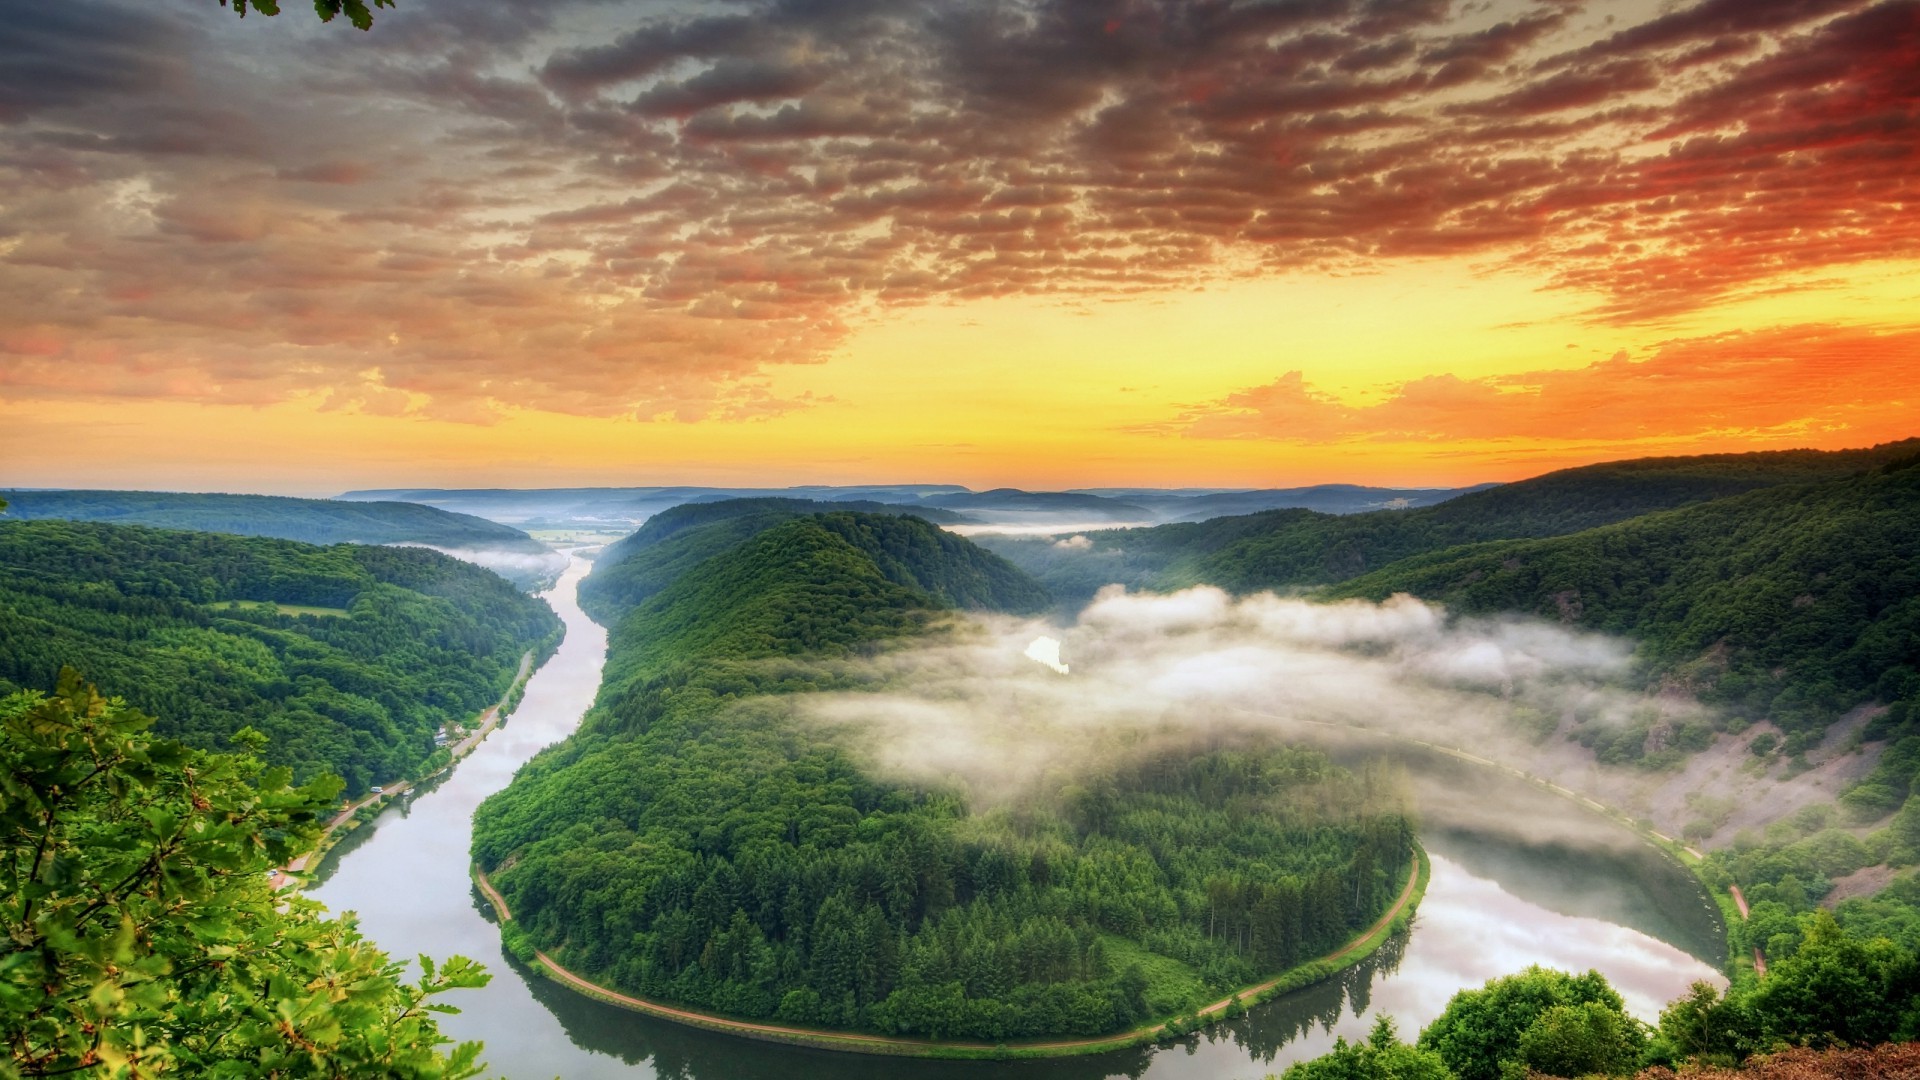 nature, Landscape, Clouds, Mist, Germany, Sunset, River, Trees, Forest, Hill, Leaves, Pine Trees, Saarschleife Wallpaper